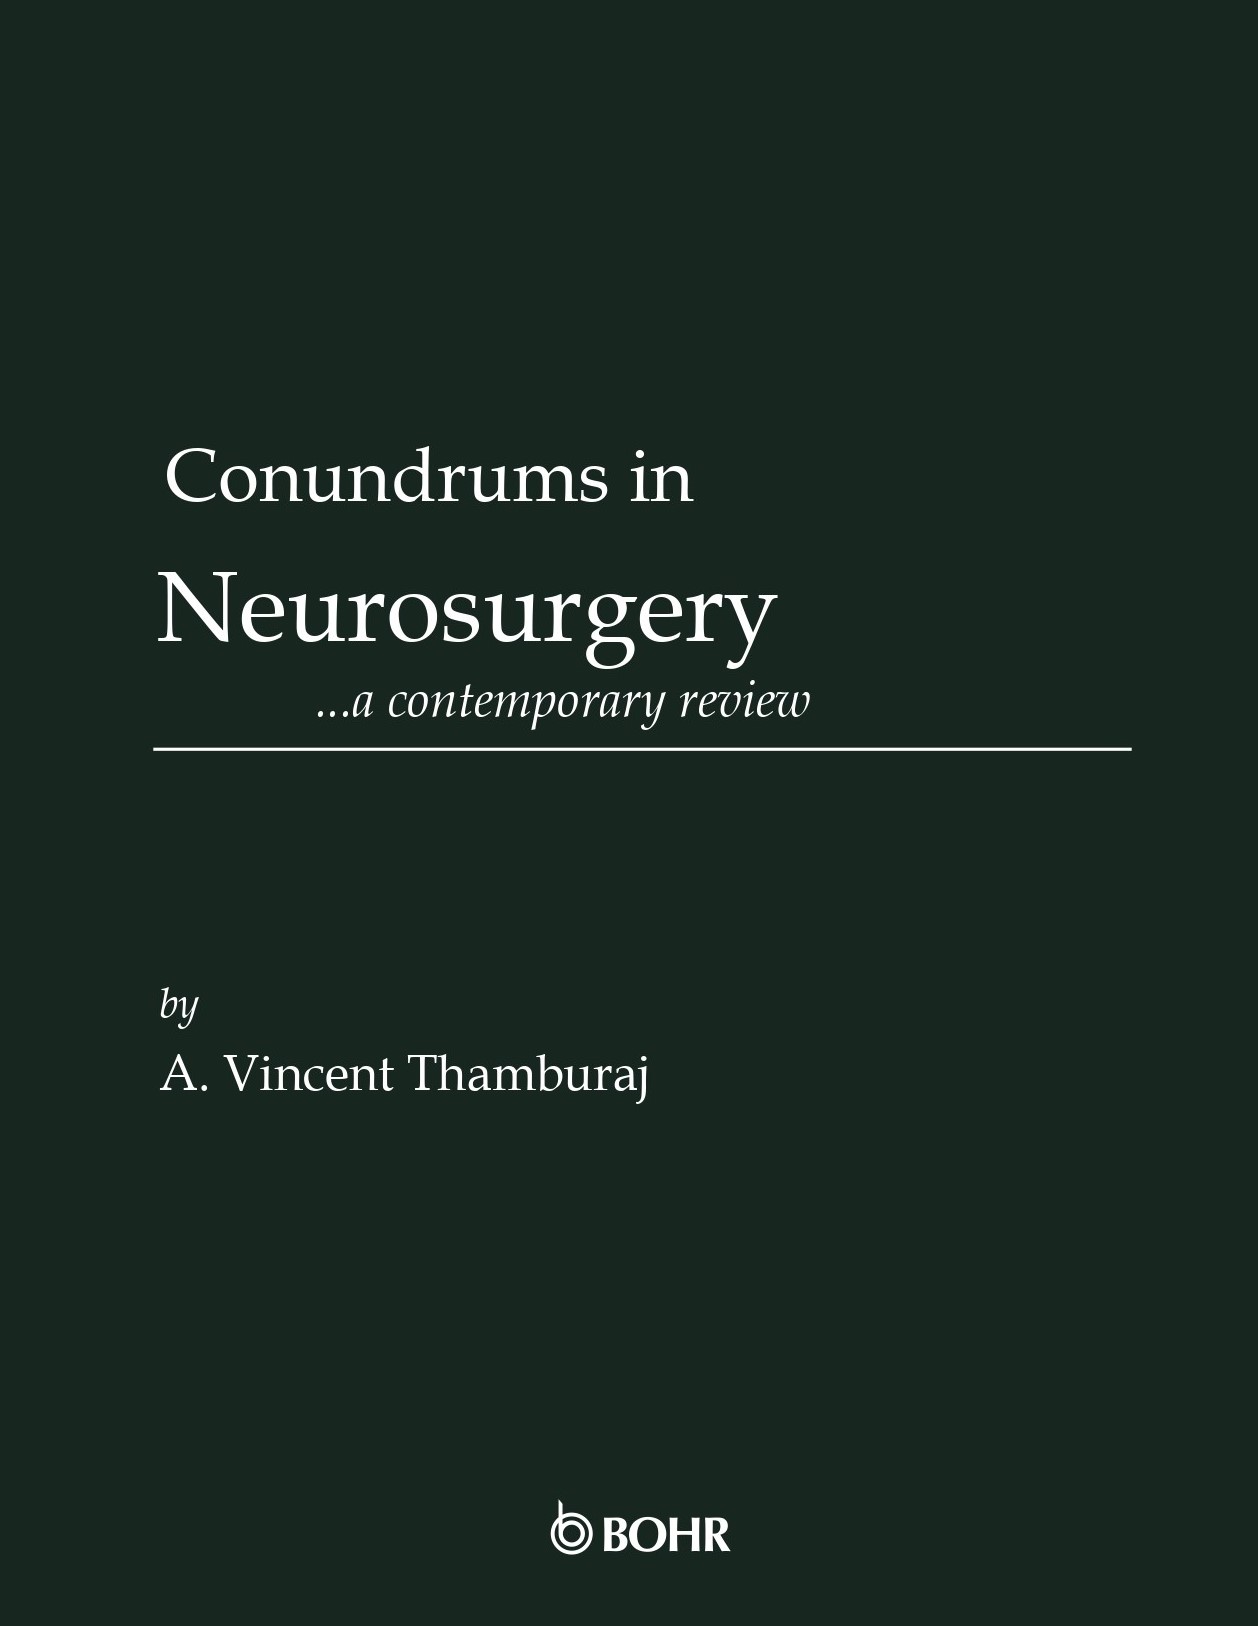 Conundrums in Neurosurgery: A Contemporary Review